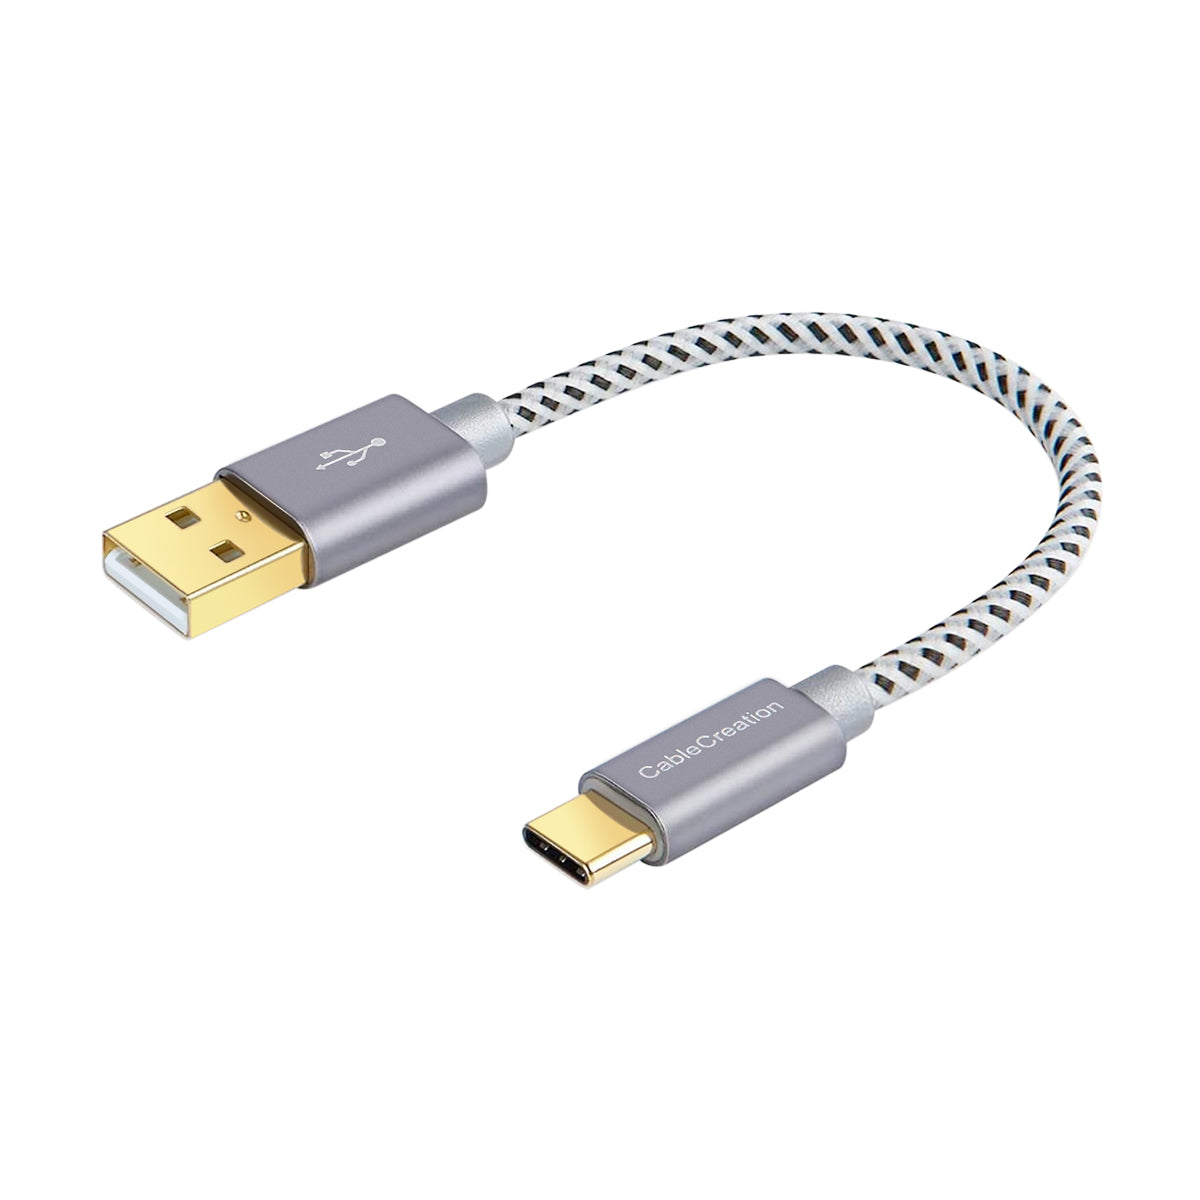 CableCreation 0.5FT USB to Micro B Bundle with 2 in 1 USB C Micro USB Cable  6.6FT